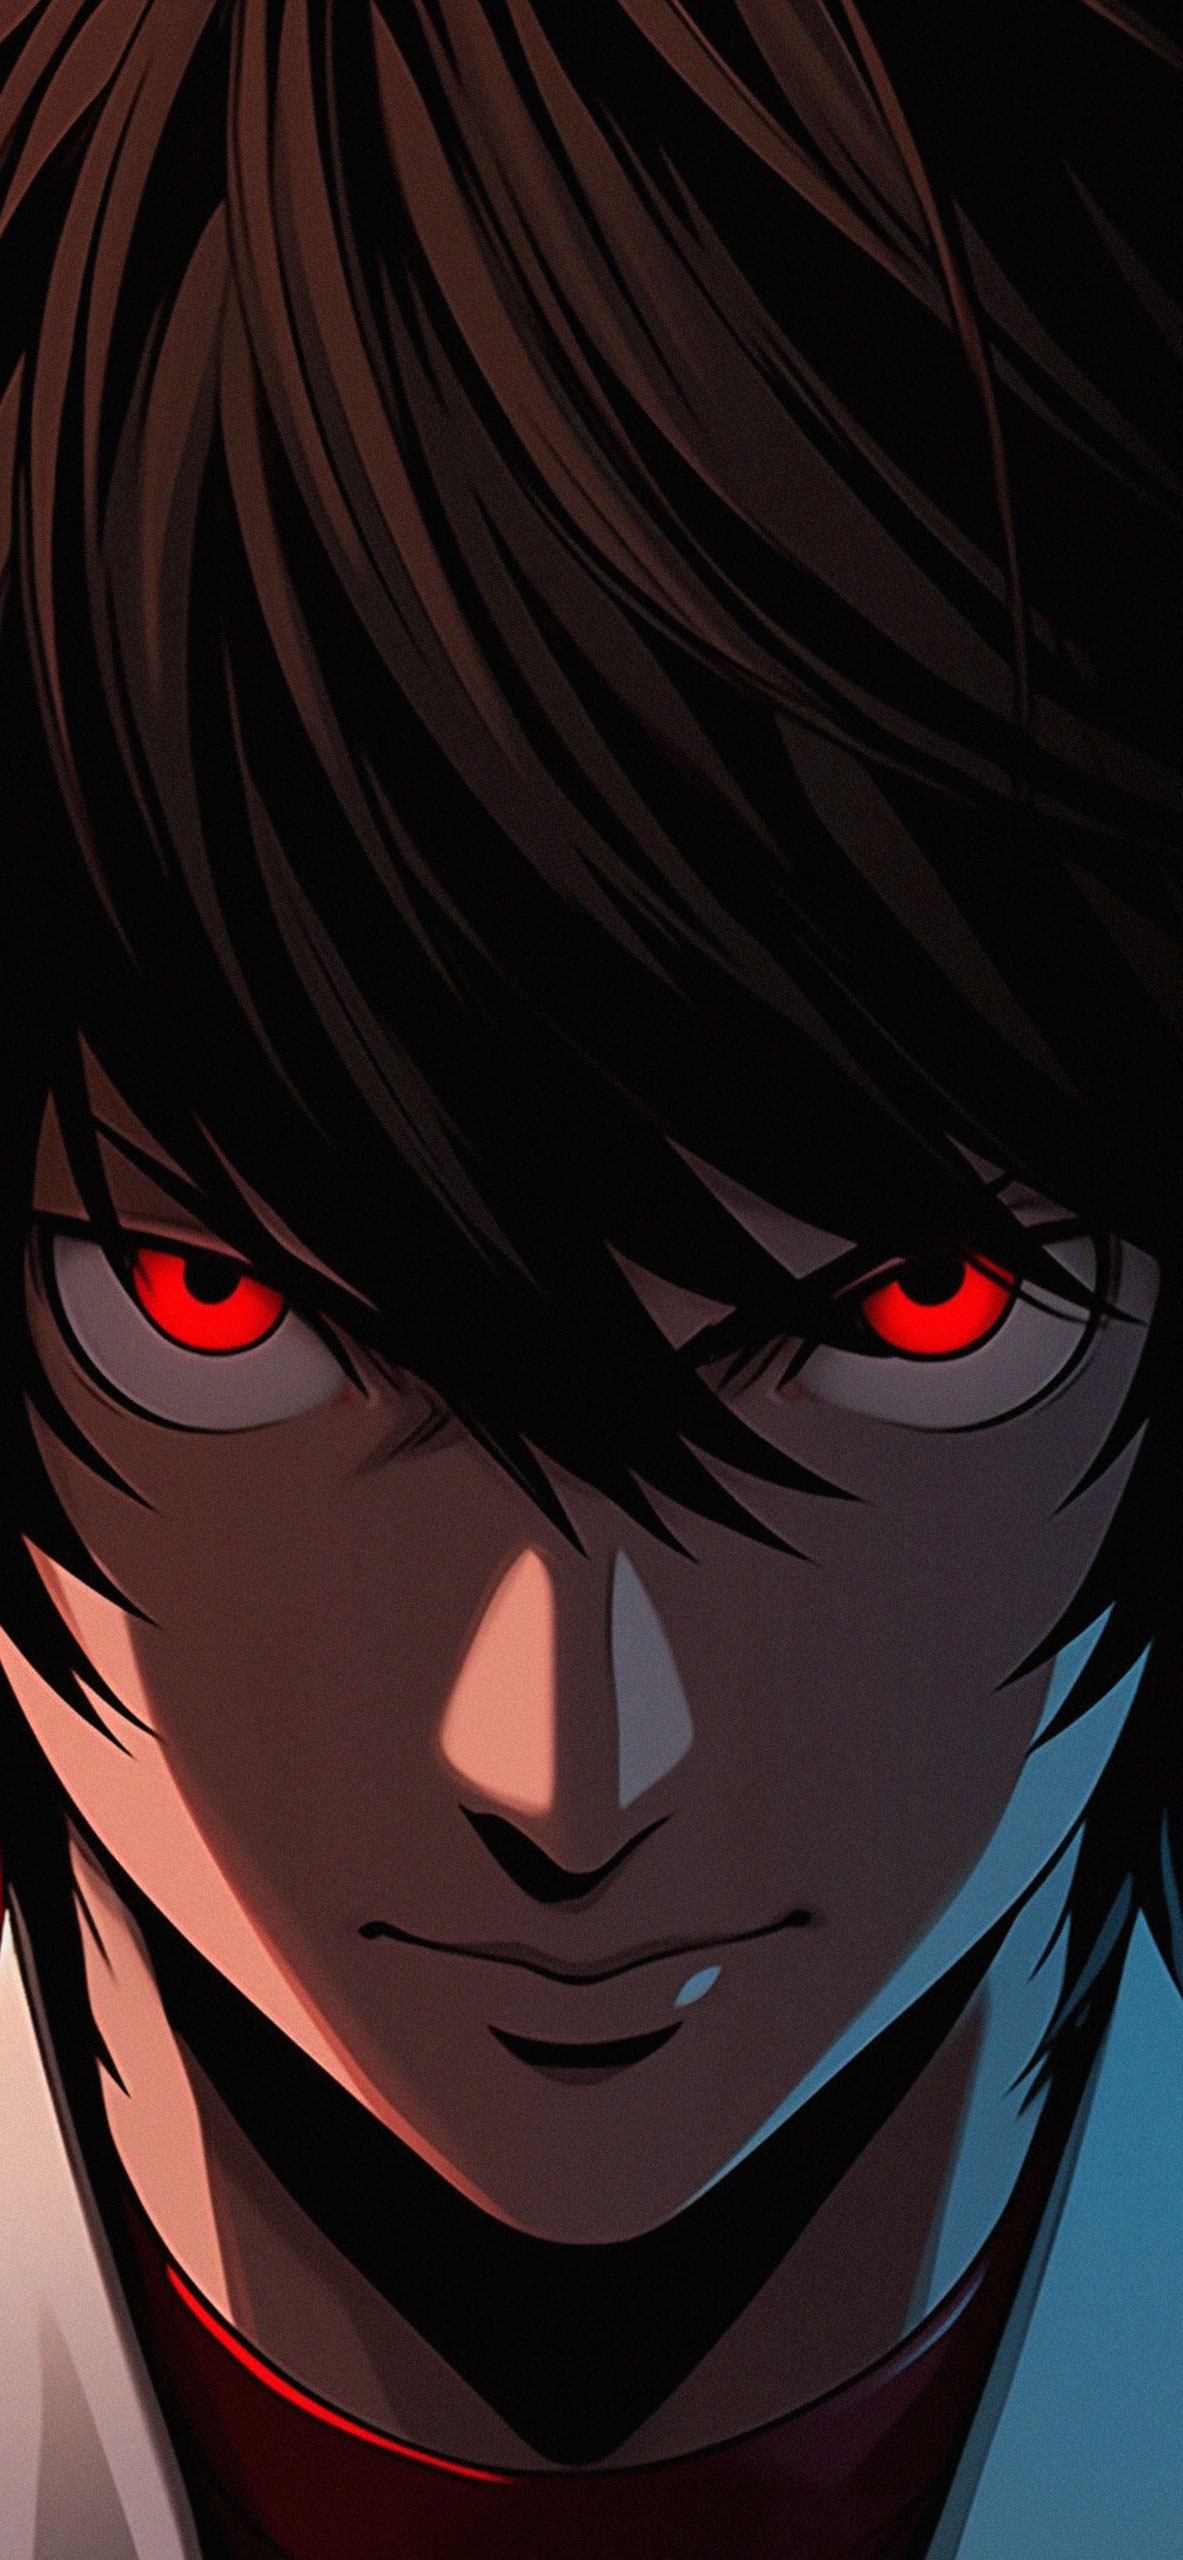 Death note L amoled wallpaper Anime dark wallpaper for iphone